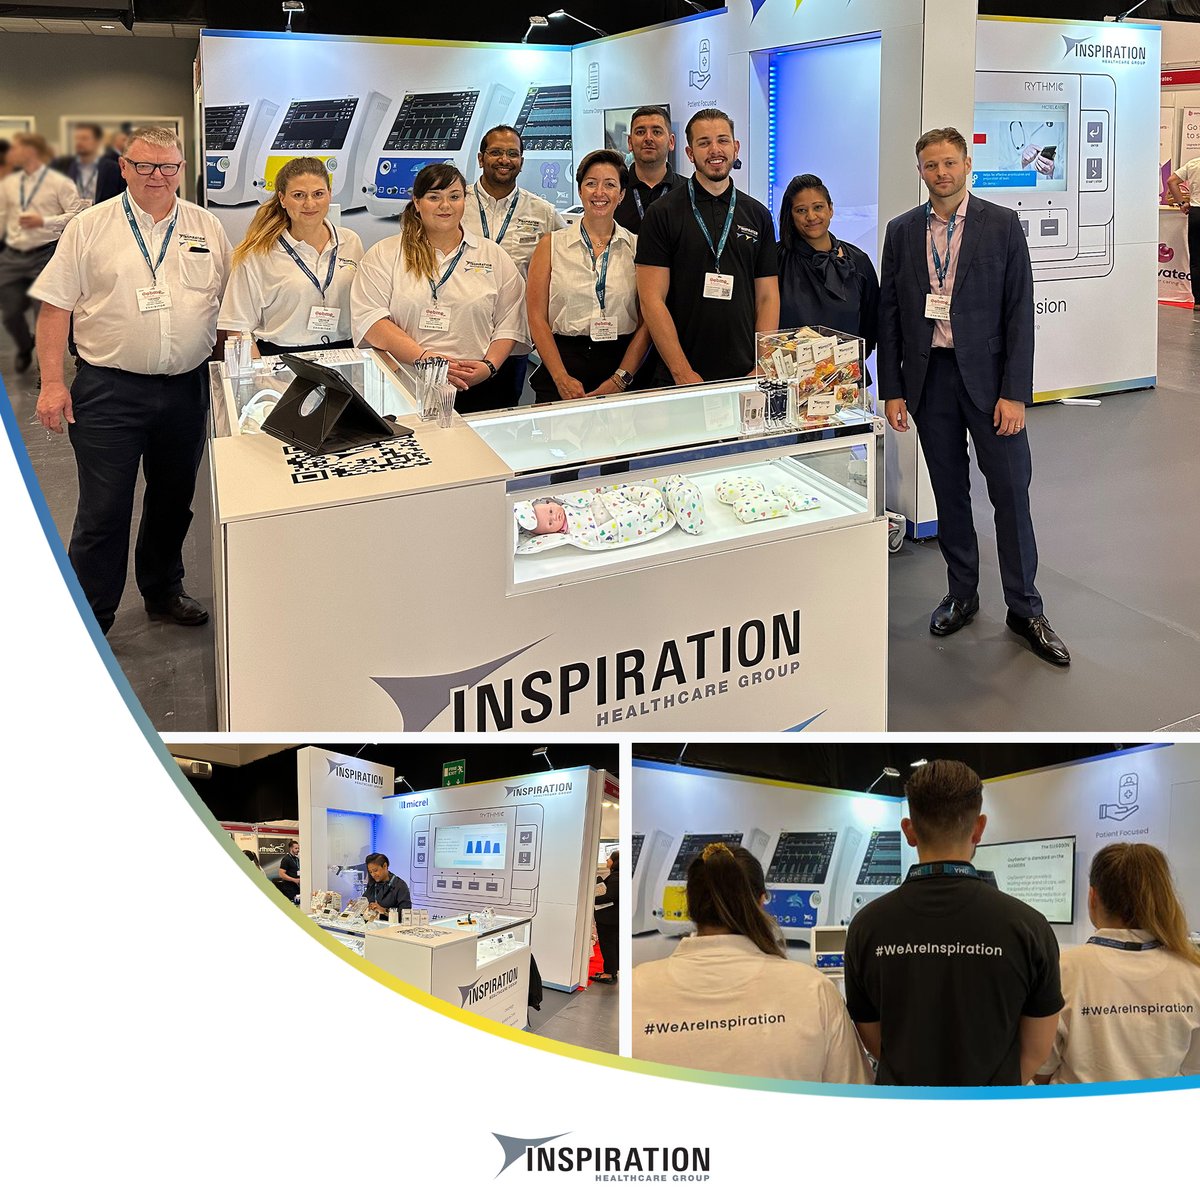 📣 Day 2 of @ebmeexpo is here!

We had a great turnout on day 1, & we can't wait to reconnect with all of you today. 

If you haven't had a chance to visit us yet, come by our stand H06/H07 & say hello to our Acute Care and Infusion teams.

#WeAreInspiration #WeAreInfusion